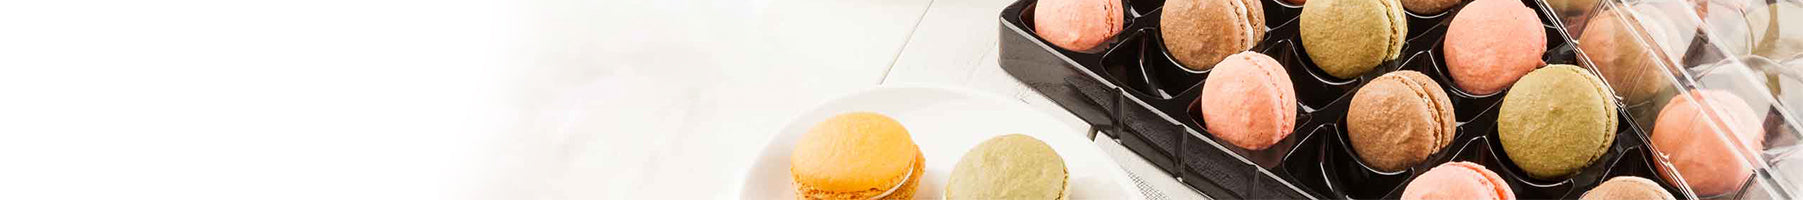 Banner_Disposables_Bakery_Macaron-Packaging_164